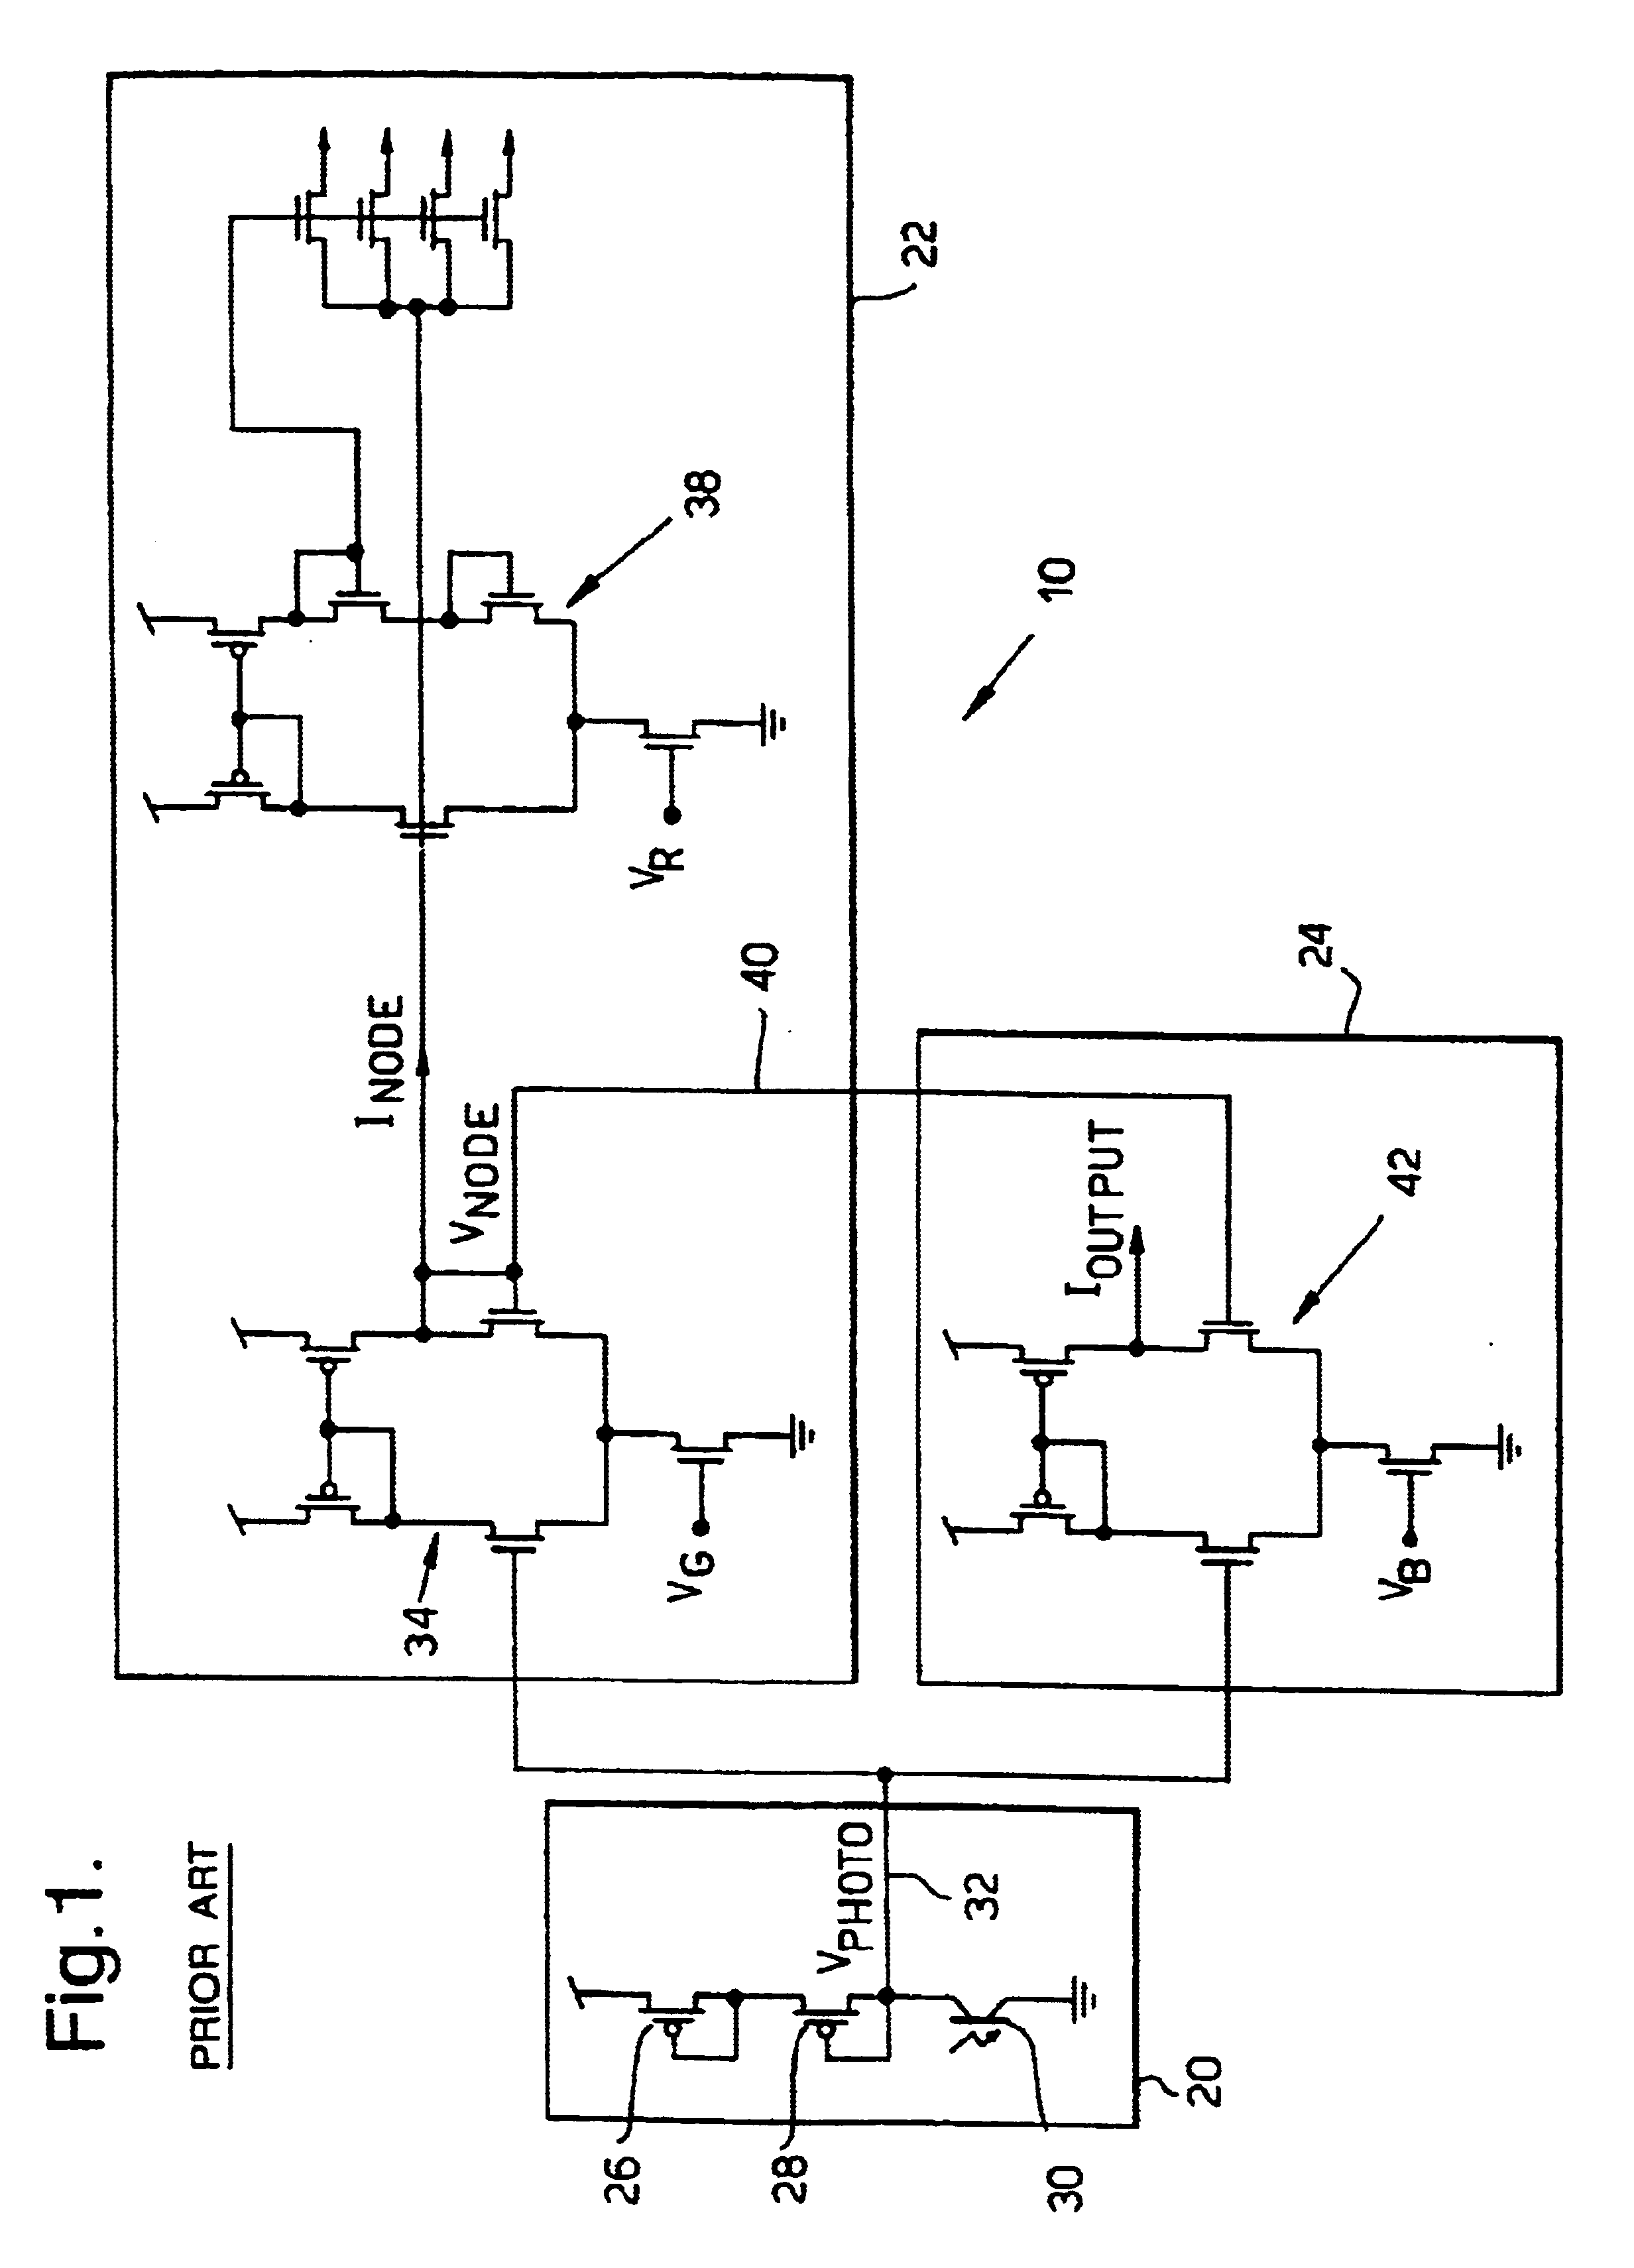 Imaging system with low sensitivity to variation in scene illumination